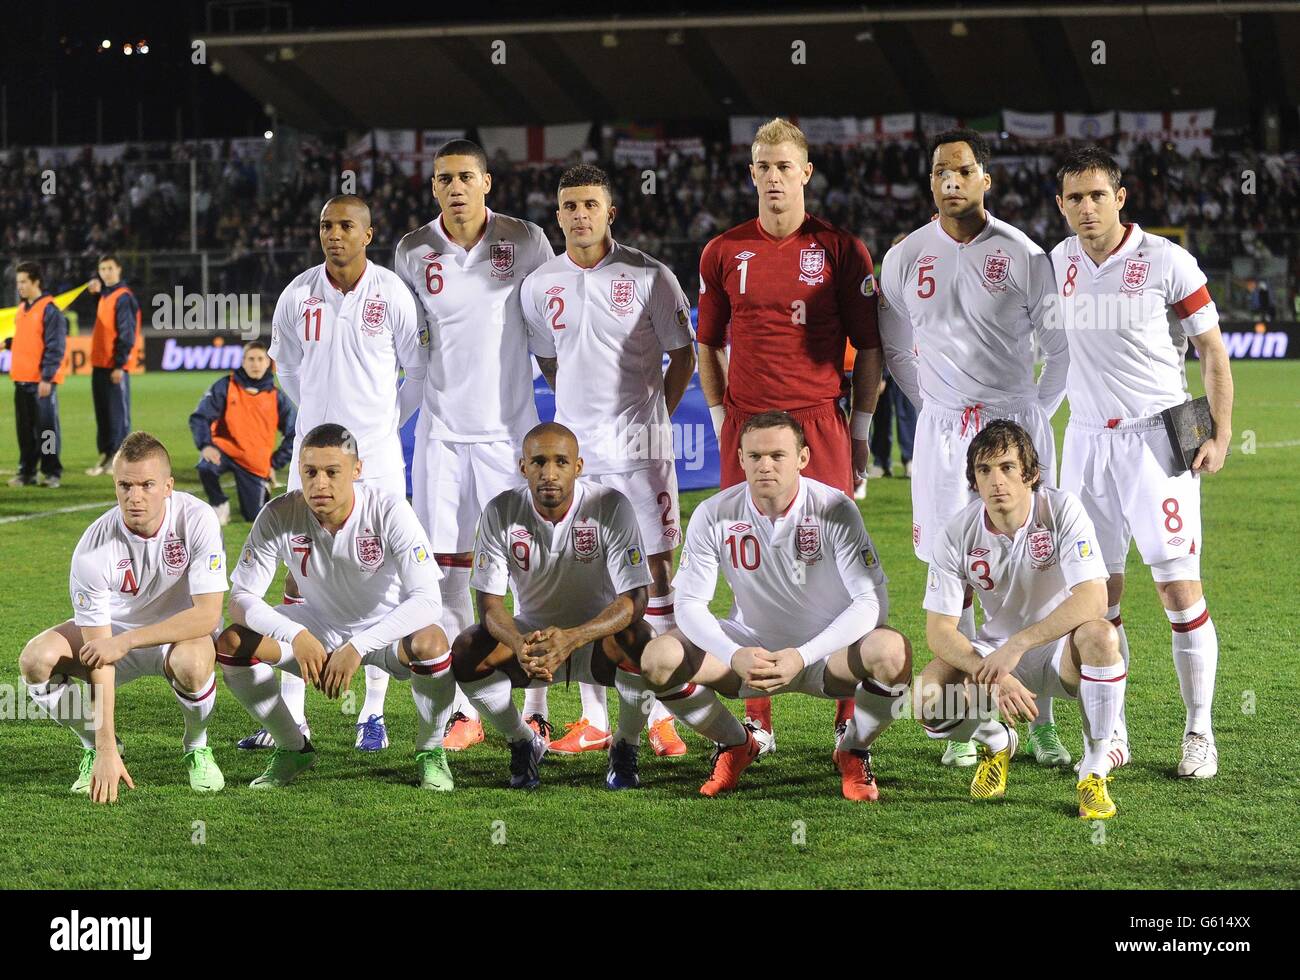 England's (back row left to right) Ashley Young, Chris Smalling, Kyle Walker, Joe Hart, Joleon Lescott, Frank Lampard (front row left to right) Tom Cleverley, Alex Oxlade-Chamberlain, Jermain Defoe, Wayne Rooney and Leighton Baines line up before the 2014 World Cup Qualifier at Serravalle Stadium, Serravalle, San Marino. Stock Photo